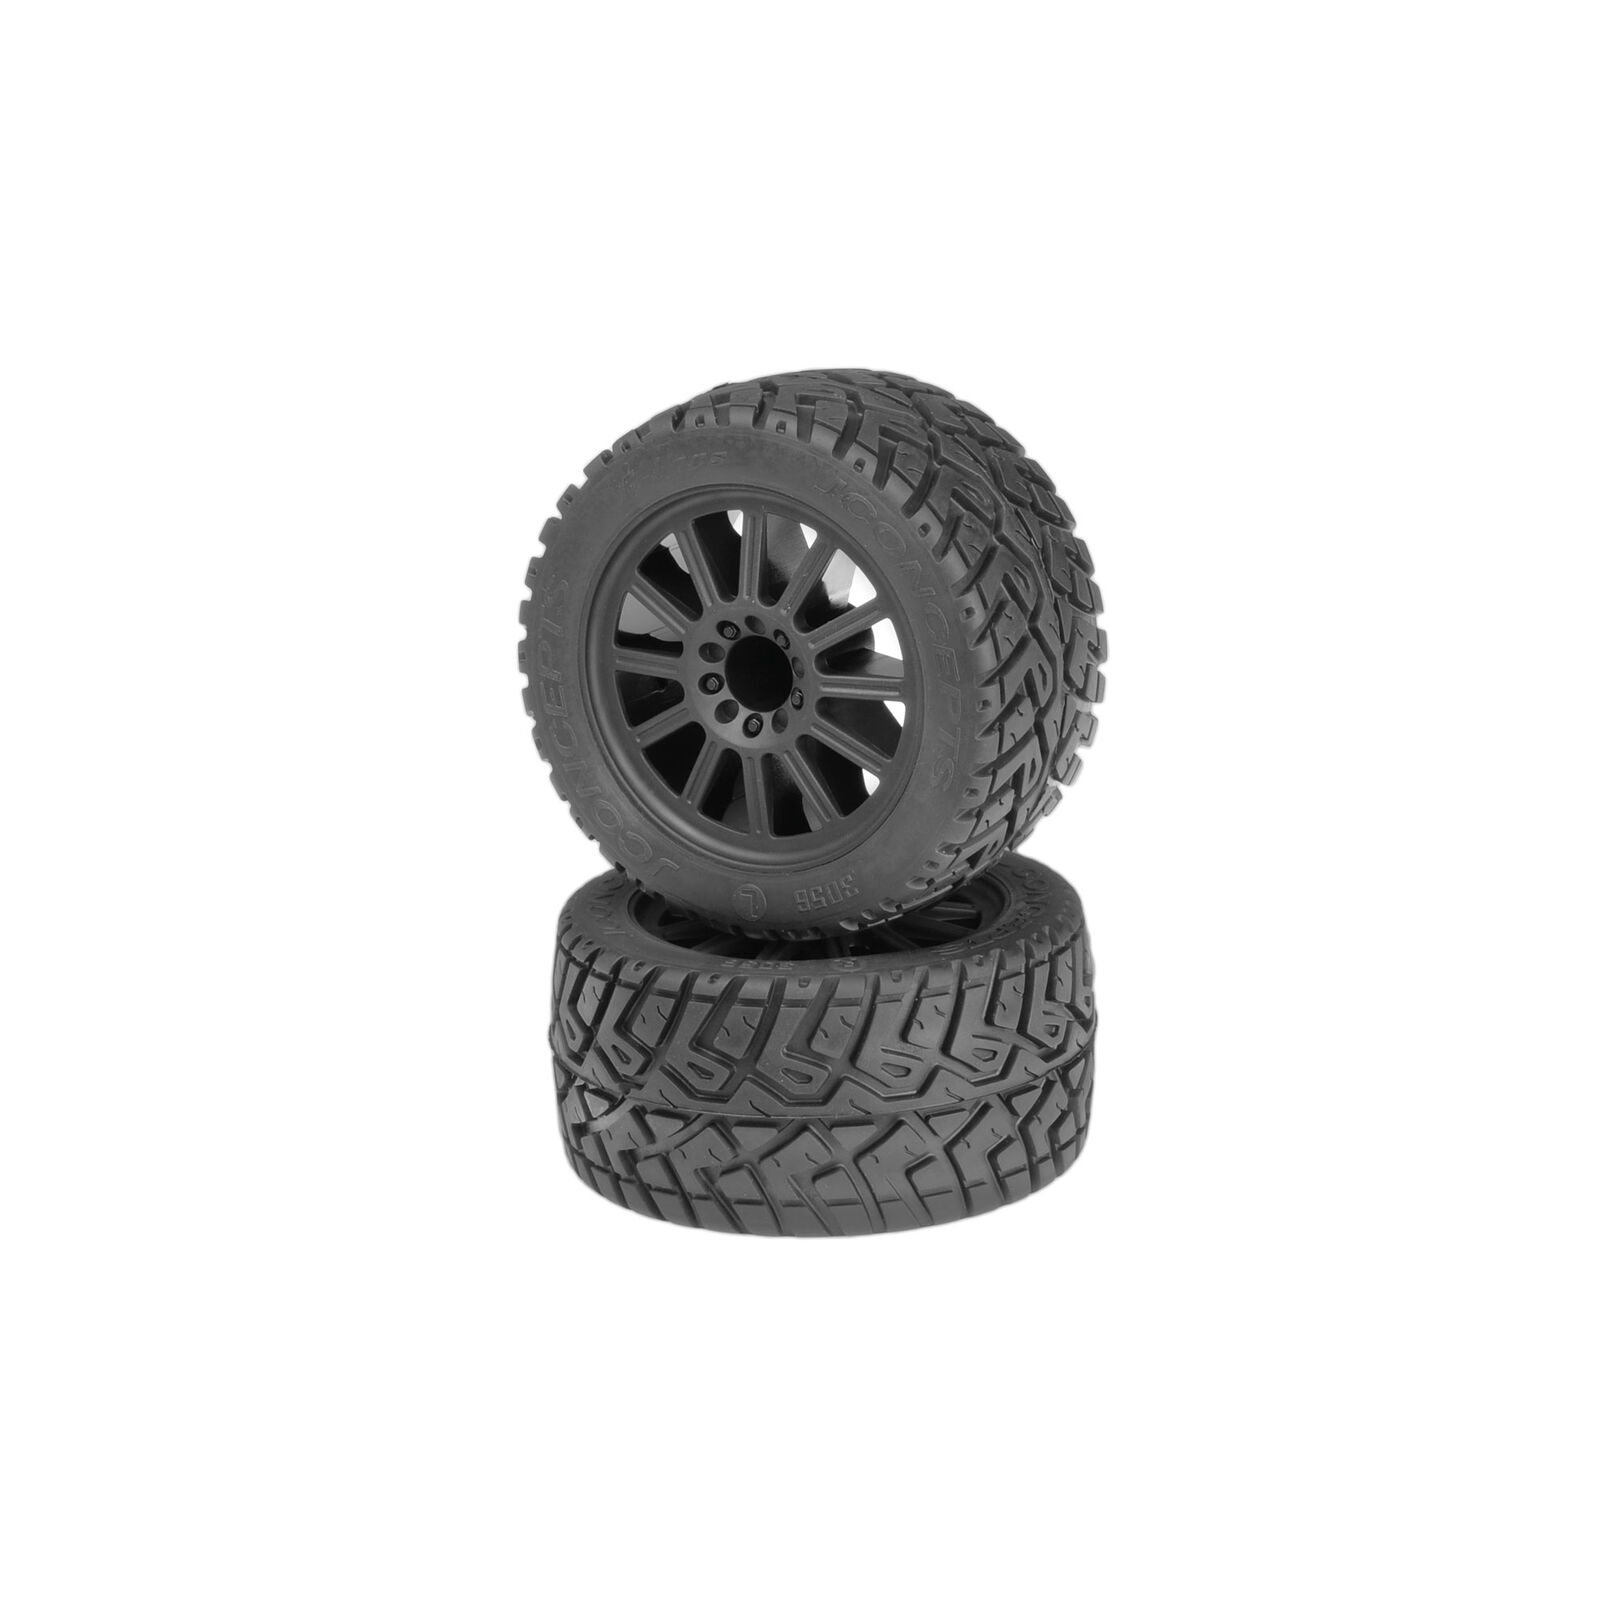 1/10 G-Locs 2.8” Rear Pre-Mounted Monster Truck Tires, Yellow Compound (2): TRA 2WD Stampede/ 2WD Rustler